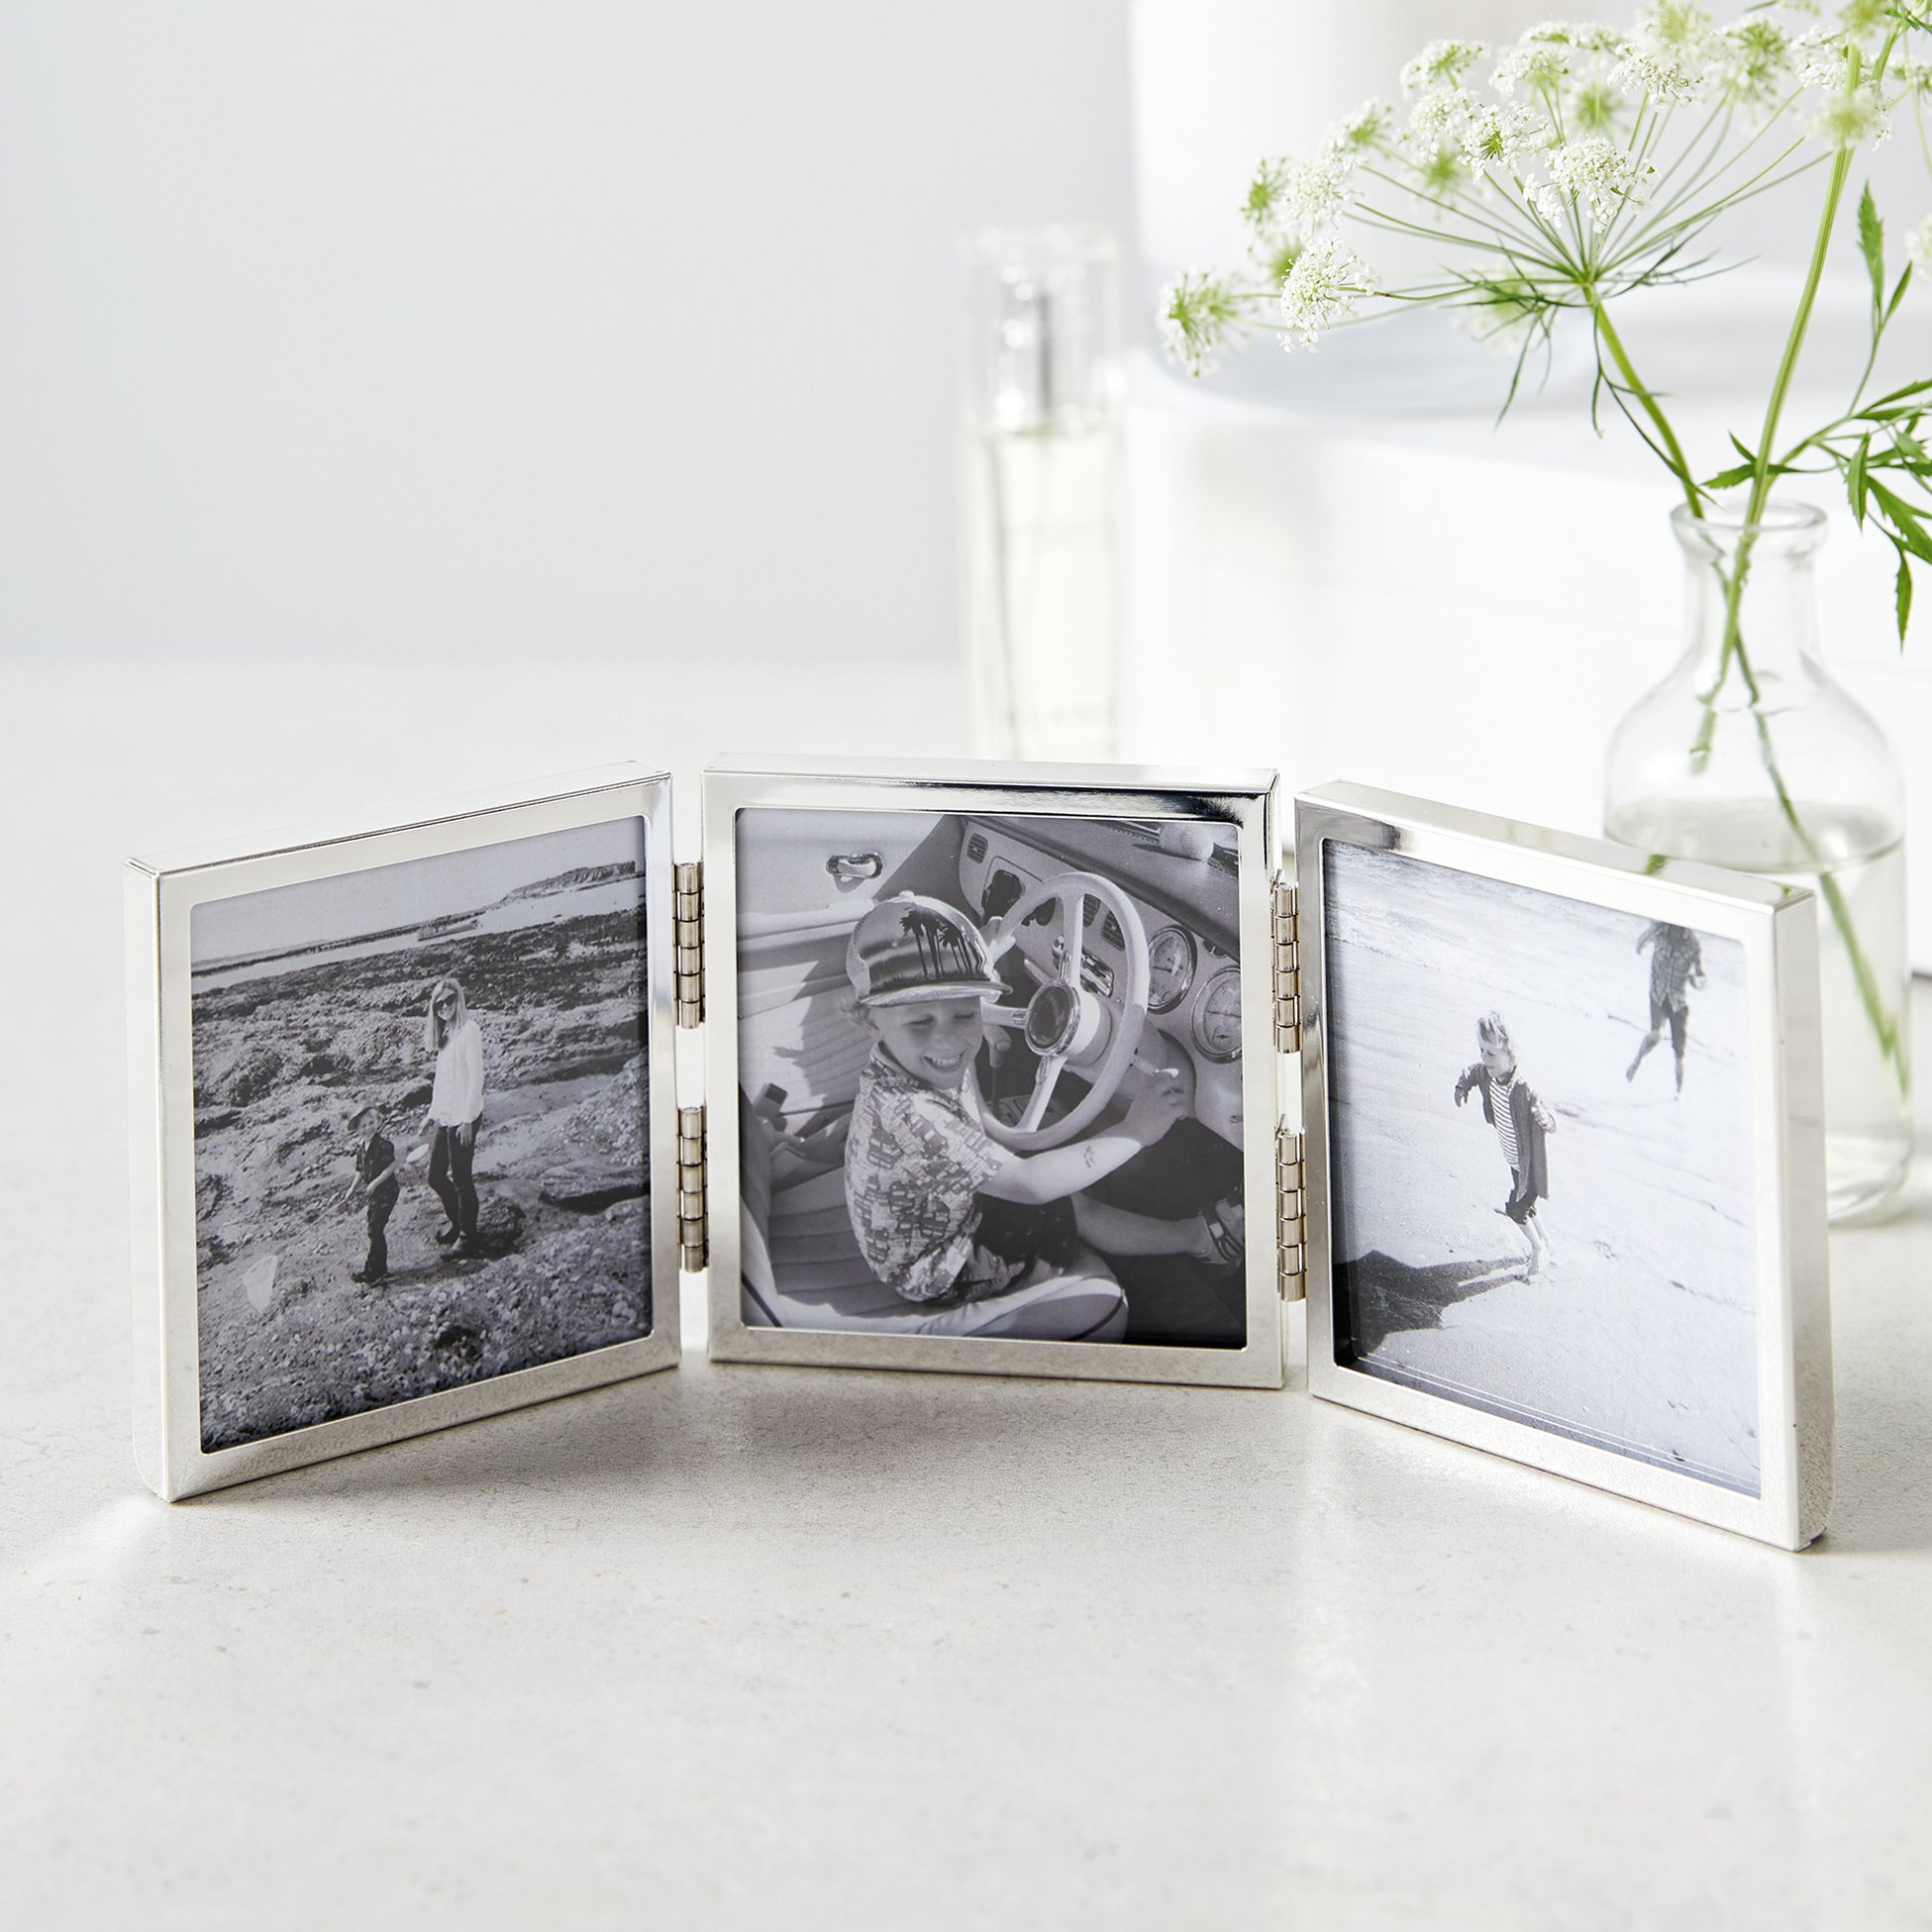 Details about   International Silver Co Silver Tone Triple Slide On Photo Frame #99117775 